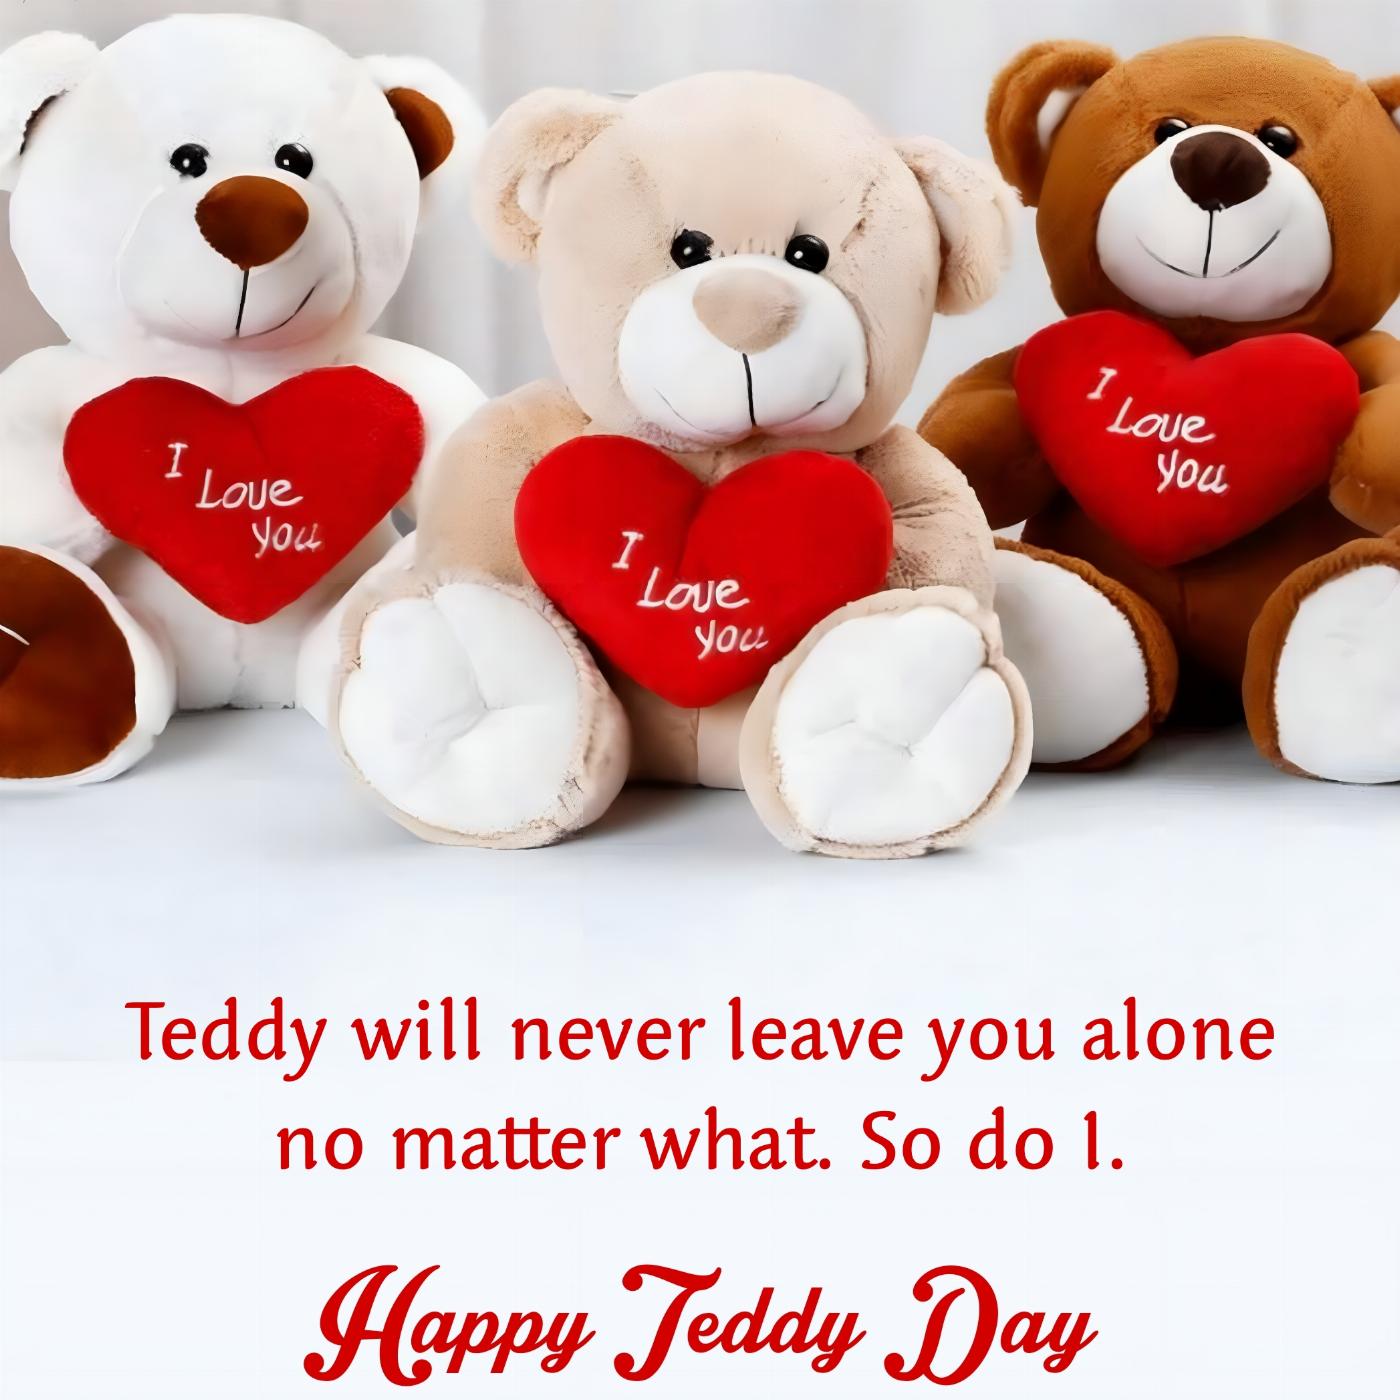 Teddy will never leave you alone no matter what